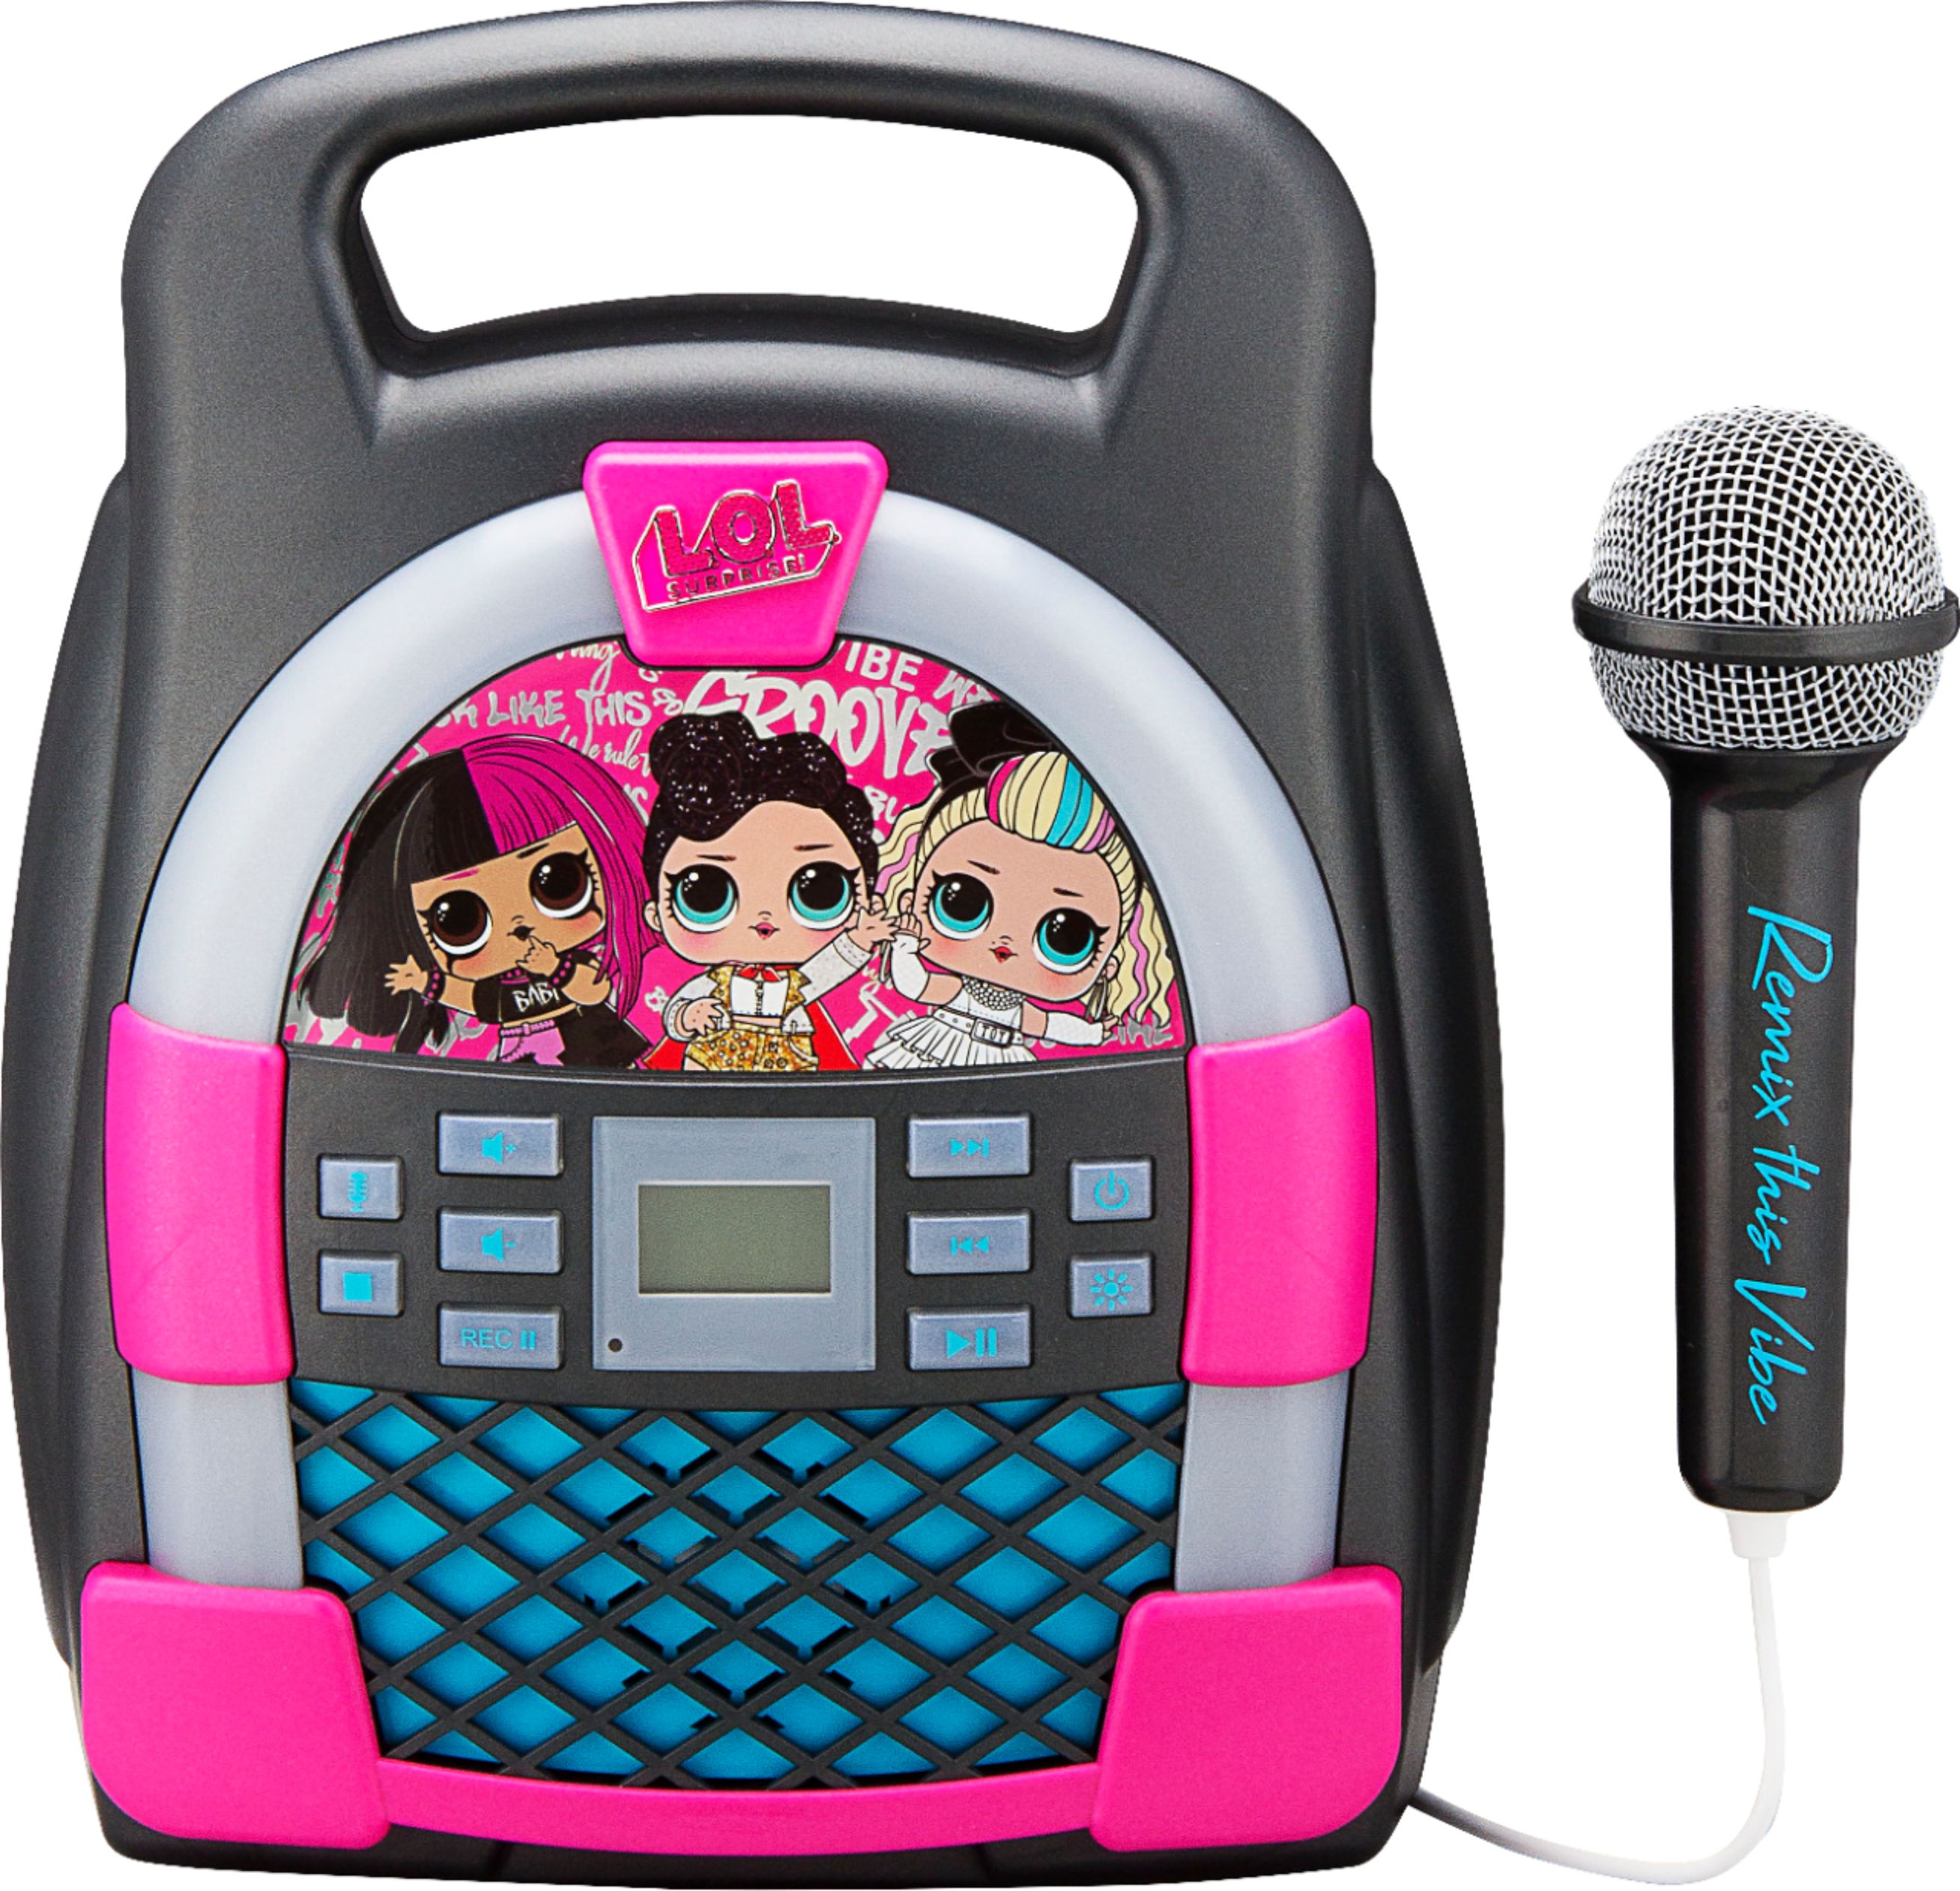 Working Mic Connects MP3 Player Audio Device w// Play Buttons Built in Music Kids Toys Portable Karaoke Machine LED Flashing Lights KIDdesigns LOL SURPRISE Sing Along Karaoke BoomBox for Kids